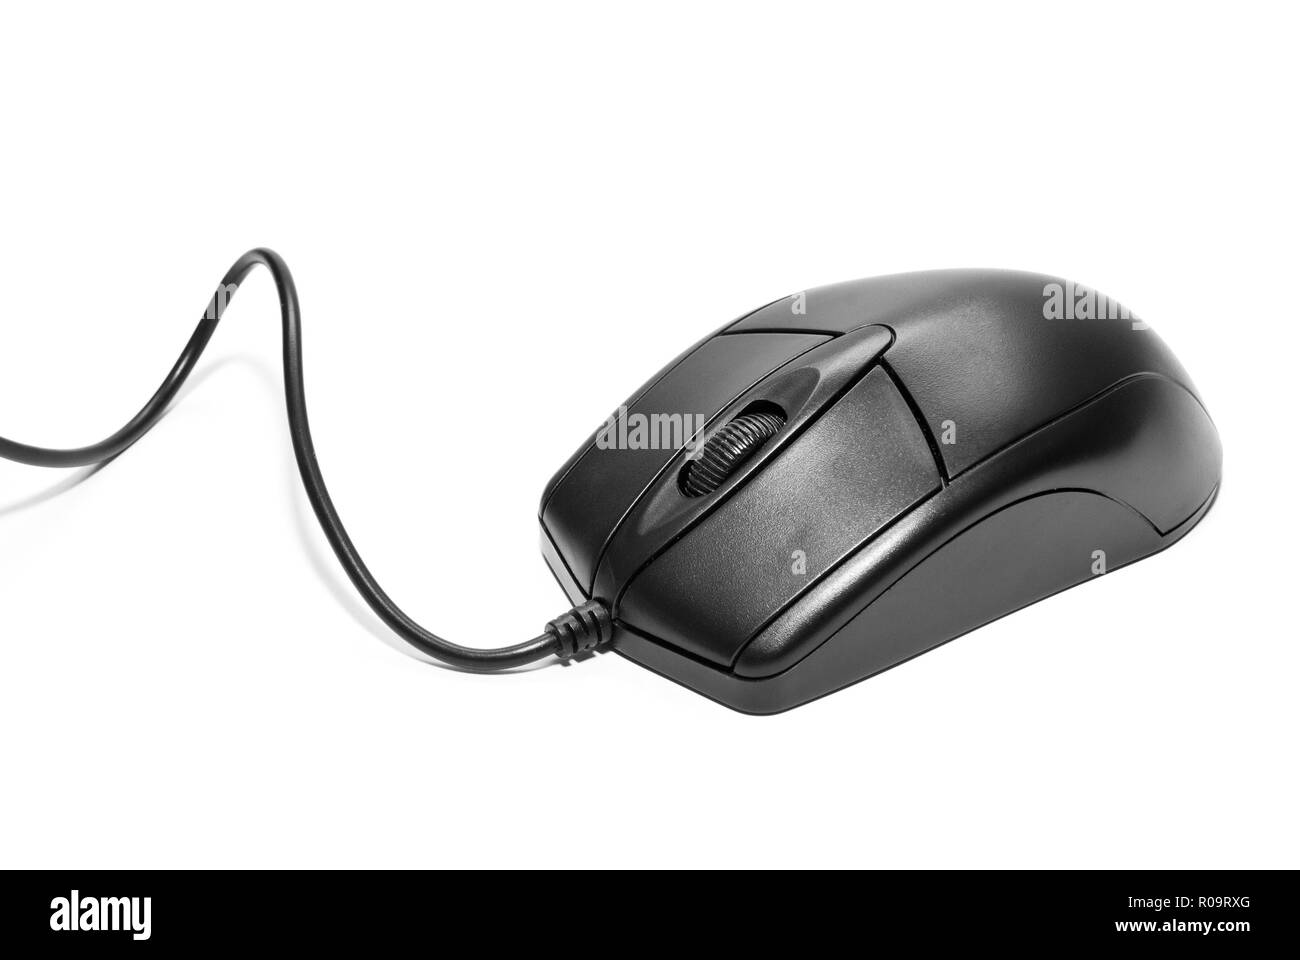 computer mouse isolated on a white background Stock Photo